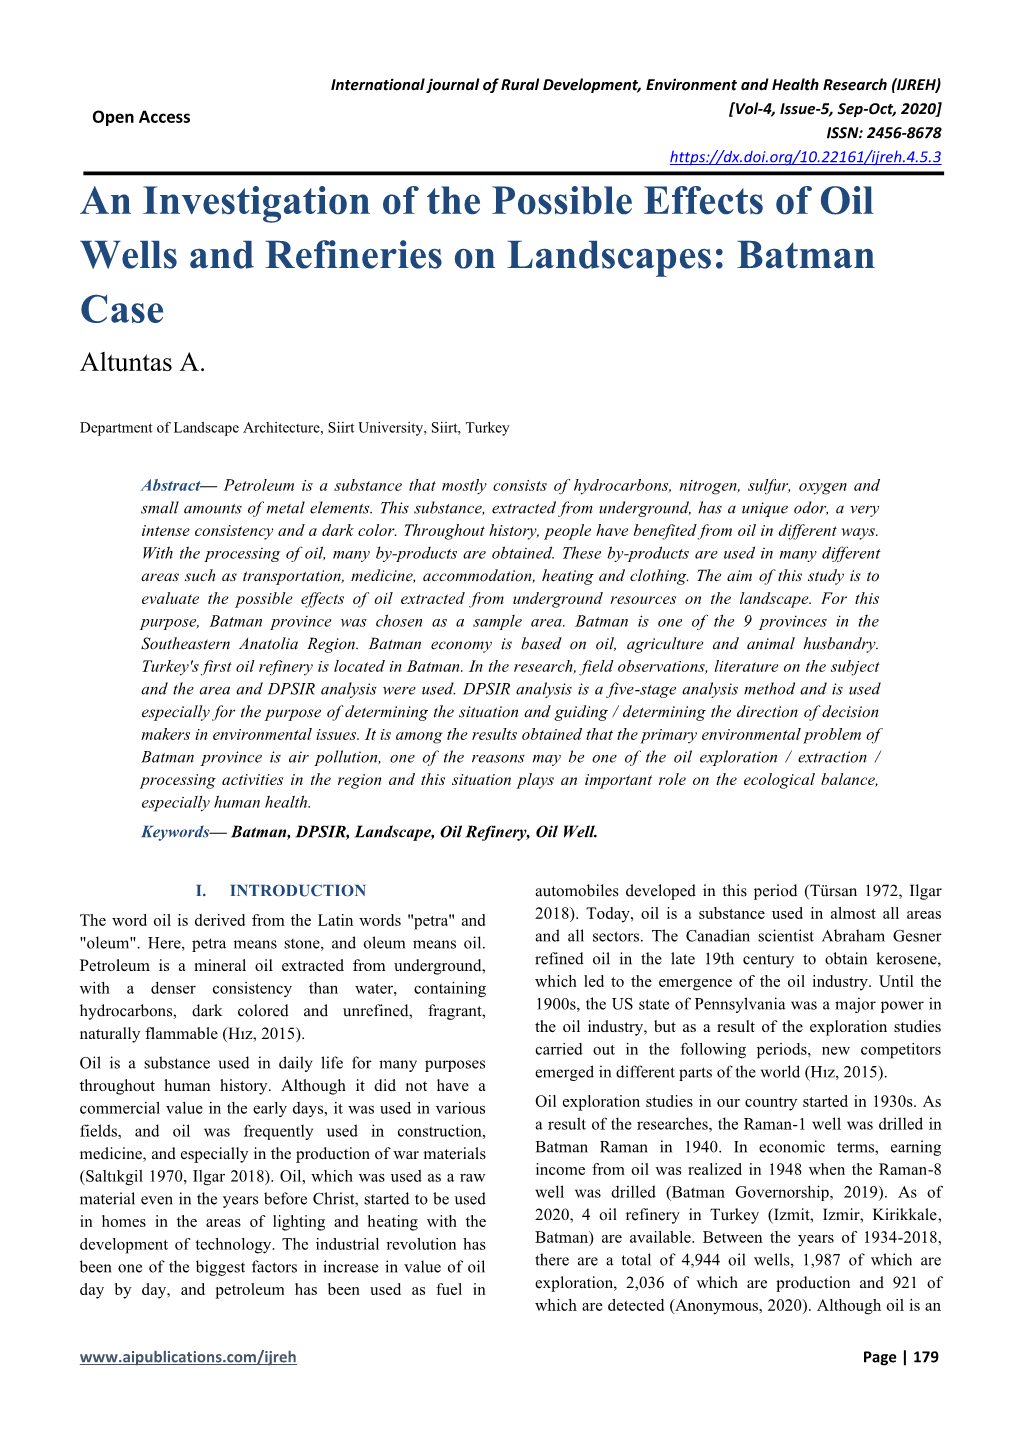 An Investigation of the Possible Effects of Oil Wells and Refineries on Landscapes: Batman Case Altuntas A